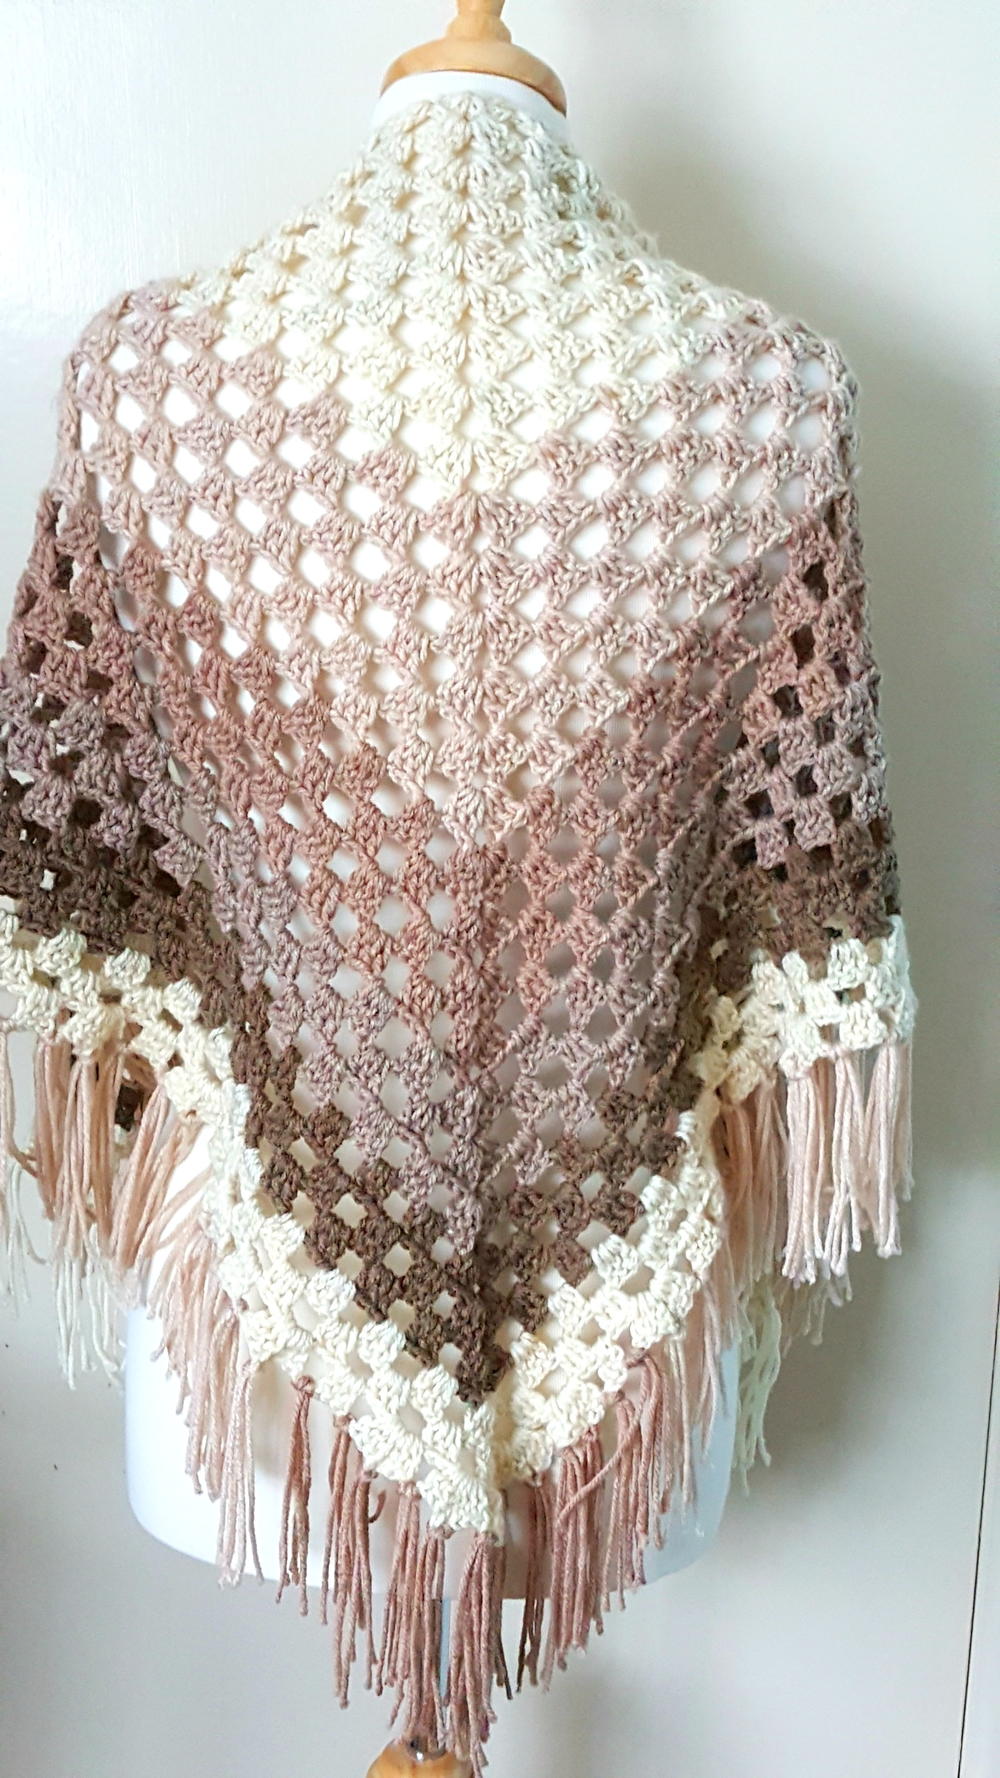 Long shawl crochet cotton ombre yarn with brushes